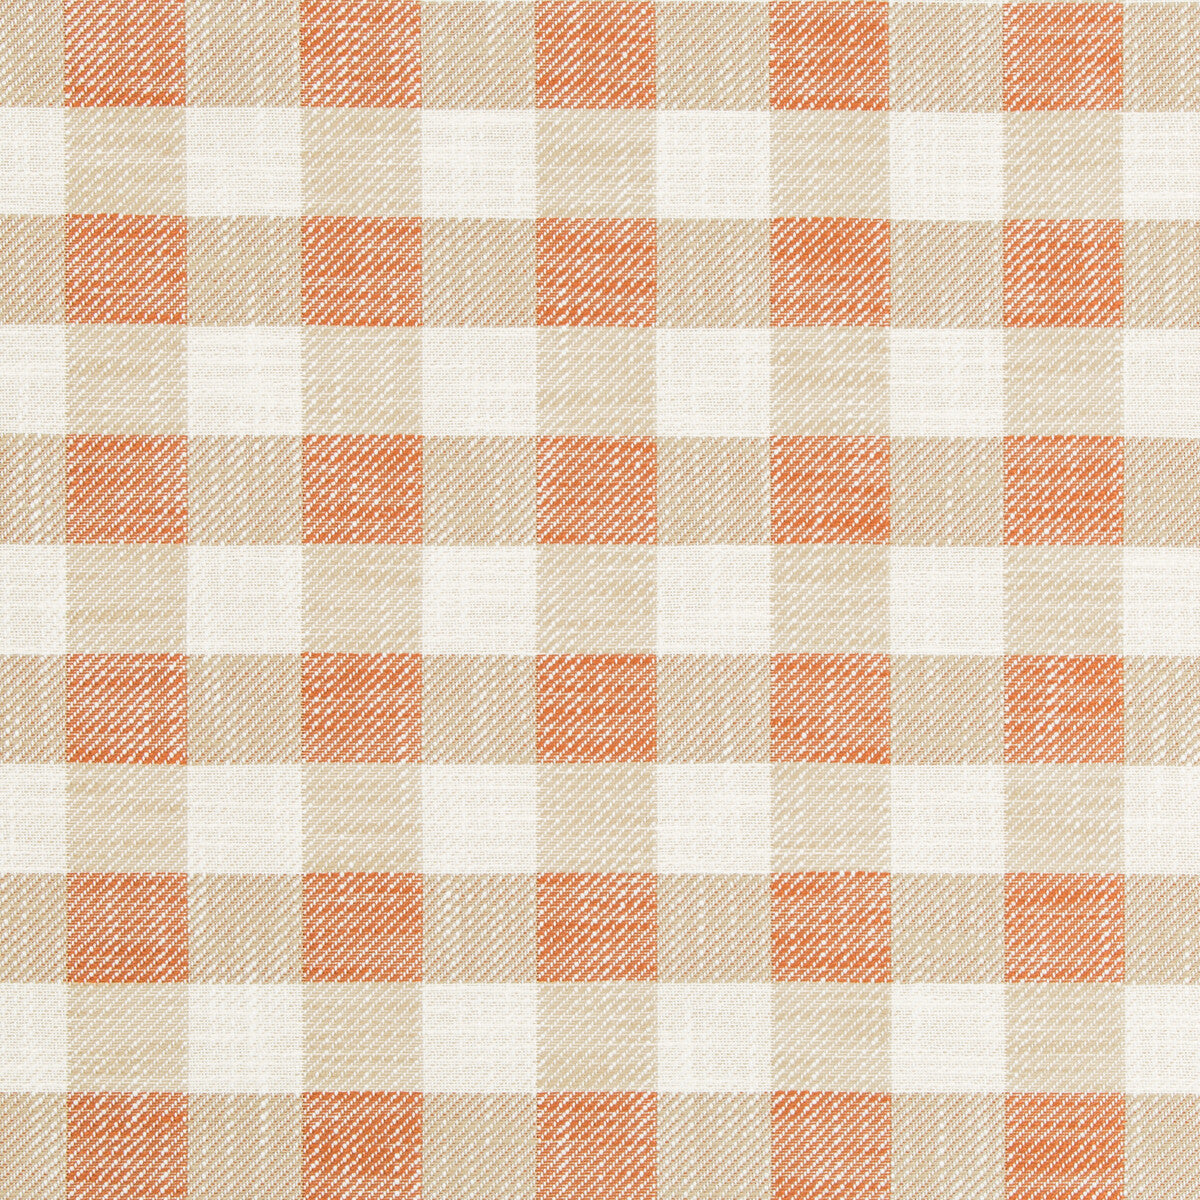 Wolcott fabric in spice color - pattern 35884.1624.0 - by Kravet Contract in the Gis Crypton collection